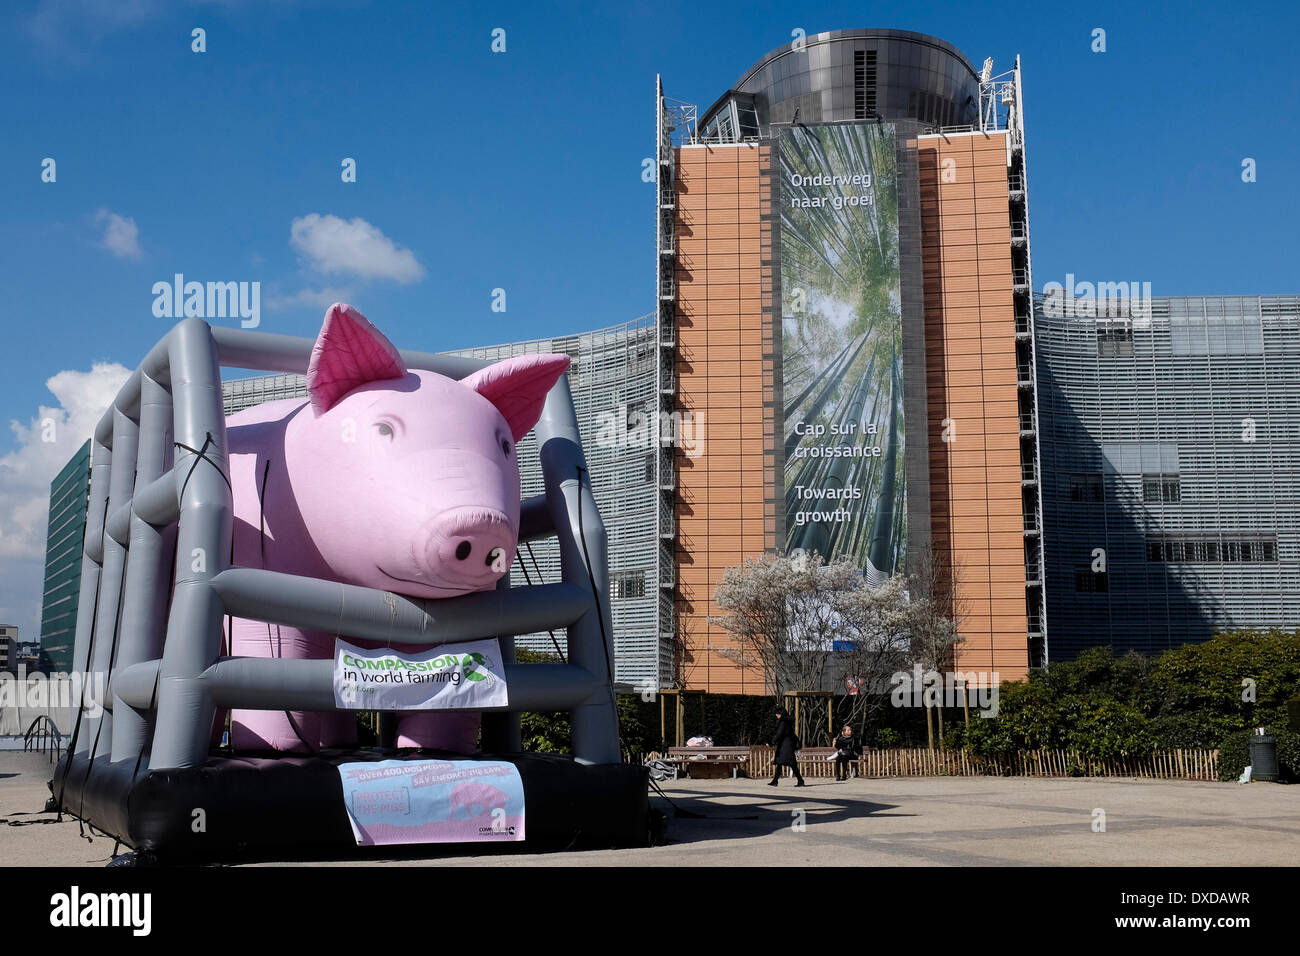 A giant inflated pig in a cage stands near the EU headquarters where the European Agriculture ministers gather for their council meeting in Brussels, Belgium on 24.03.2014 The pig is set up by animal rights activists of Compassion in World Farming (CIWF) who protest to raise awareness for the plight of pigs in countries where they are suffering in illegal and inhumane conditions. by Wiktor Dabkowski Stock Photo